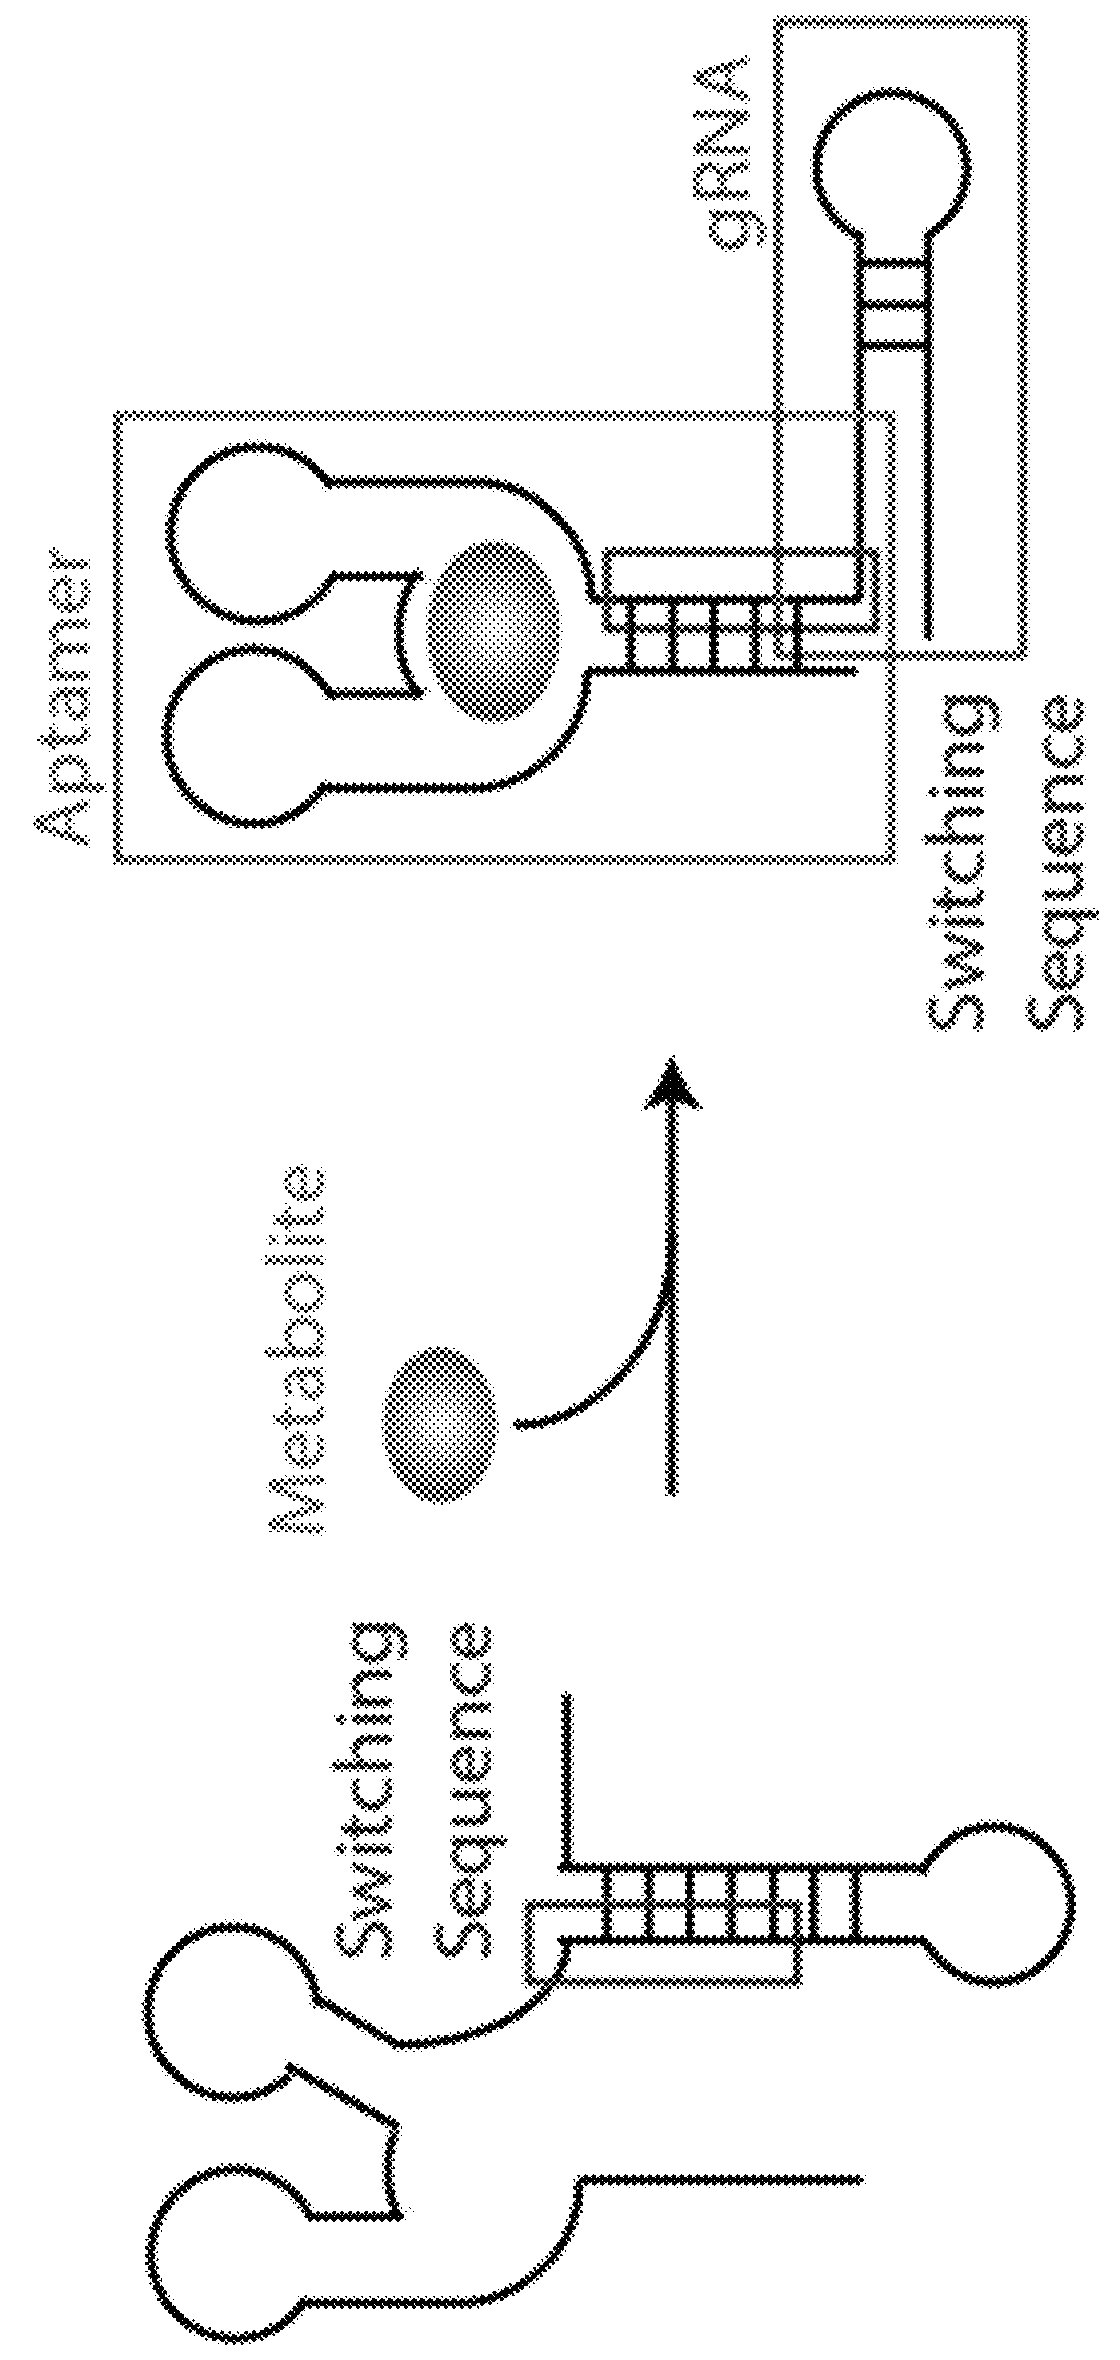 Switchable gRNAs comprising aptamers